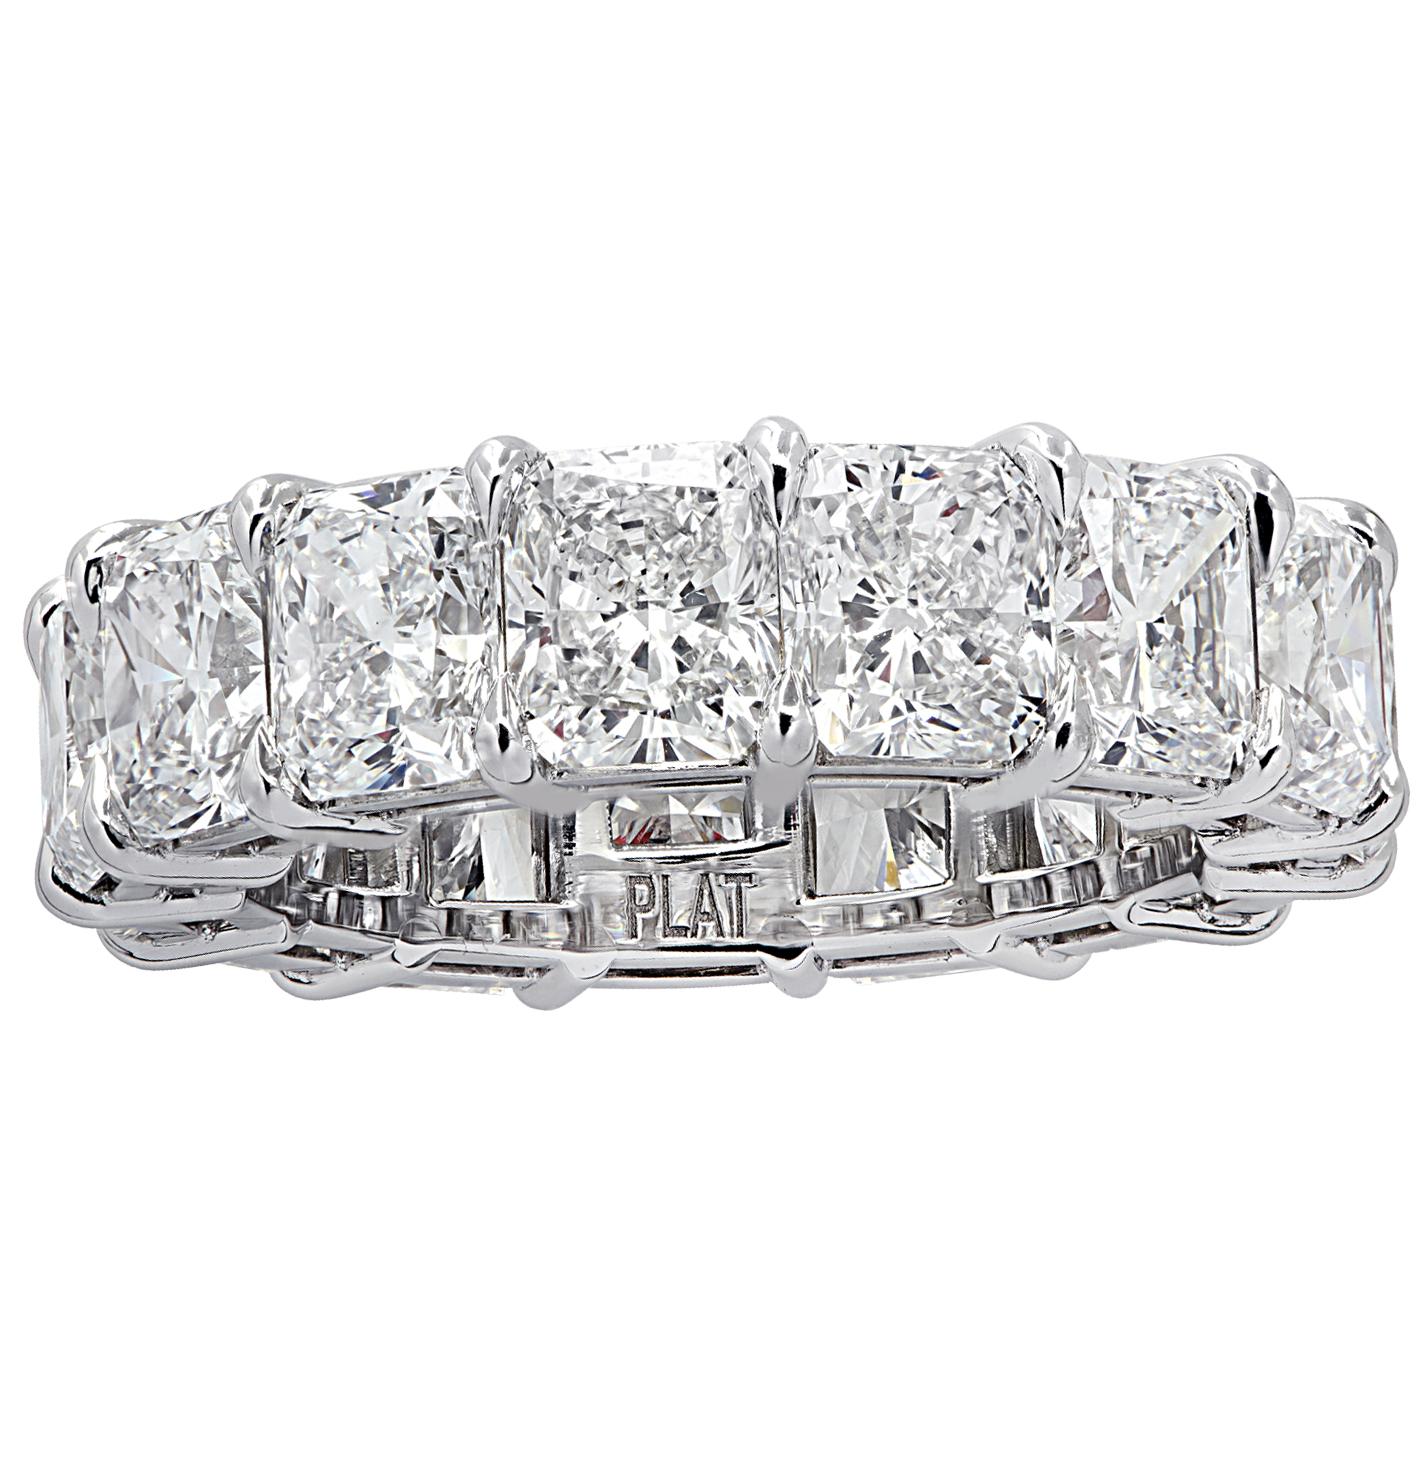 Exquisite Vivid Diamonds eternity band crafted in platinum, featuring 14 spectacular radiant cut diamonds weighing 10.73 carats total, E-F color, VVS - VS clarity. Each diamond was carefully selected, perfectly matched and set in a seamless sea of